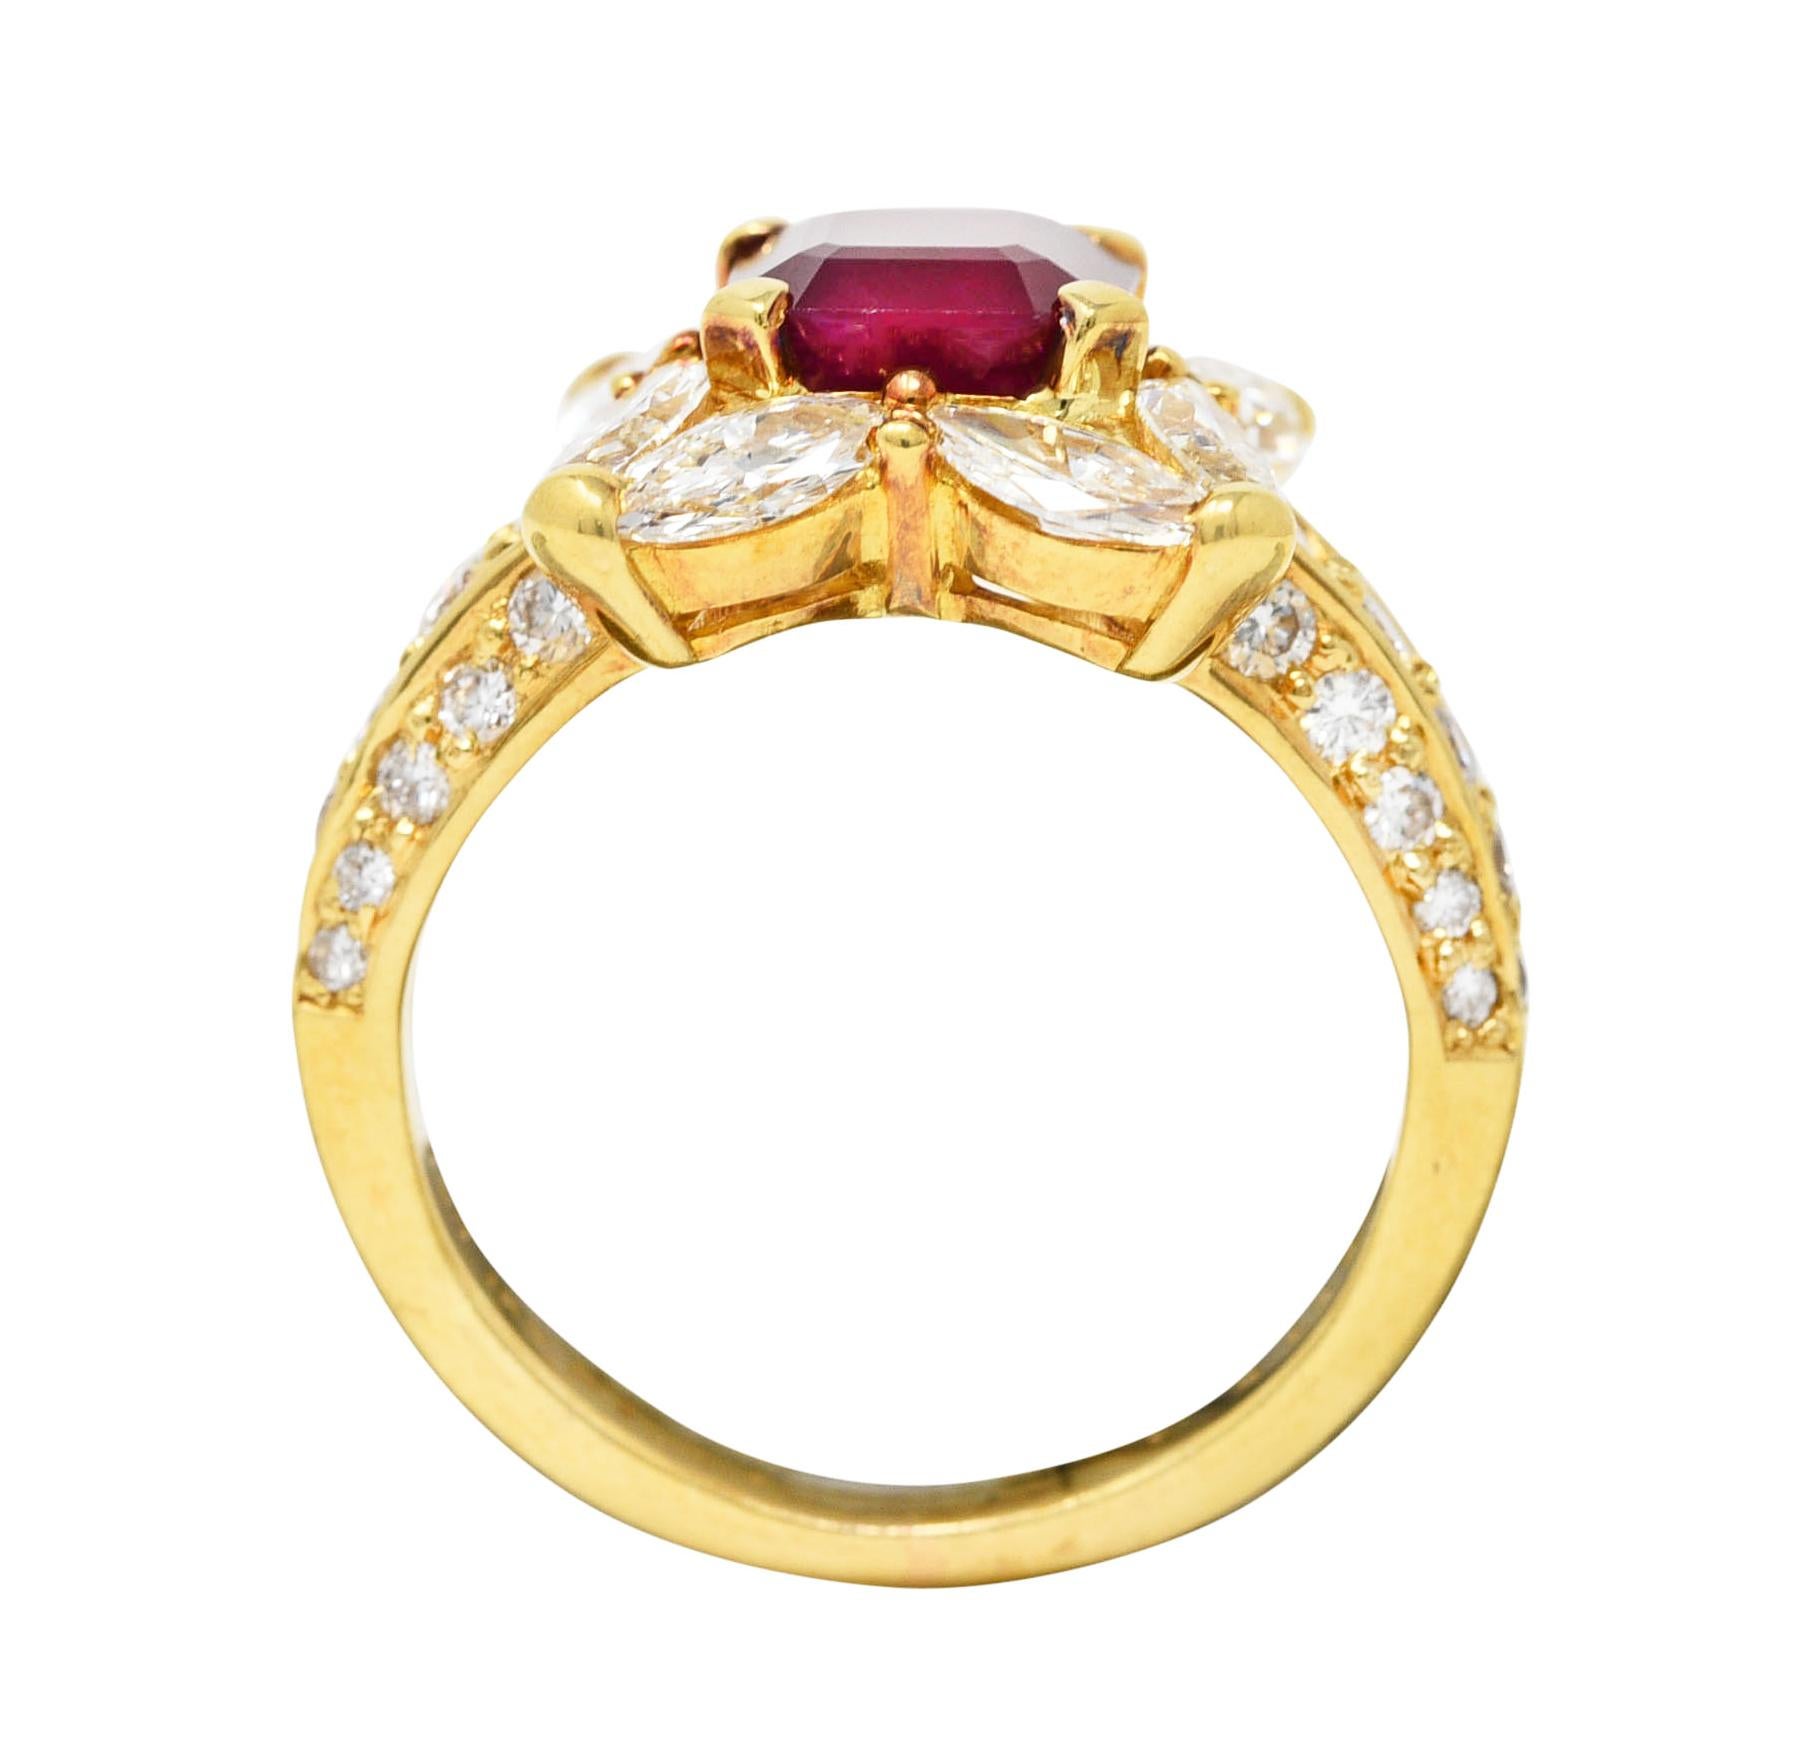 Centering an emerald cut ruby weighing 1.93 carats total - transparent medium red in color. Natural Vietnamese in origin - prong set with marquise cut diamond halo surround. Arranged as cushion shape and flanked by pavé set round brilliant cut